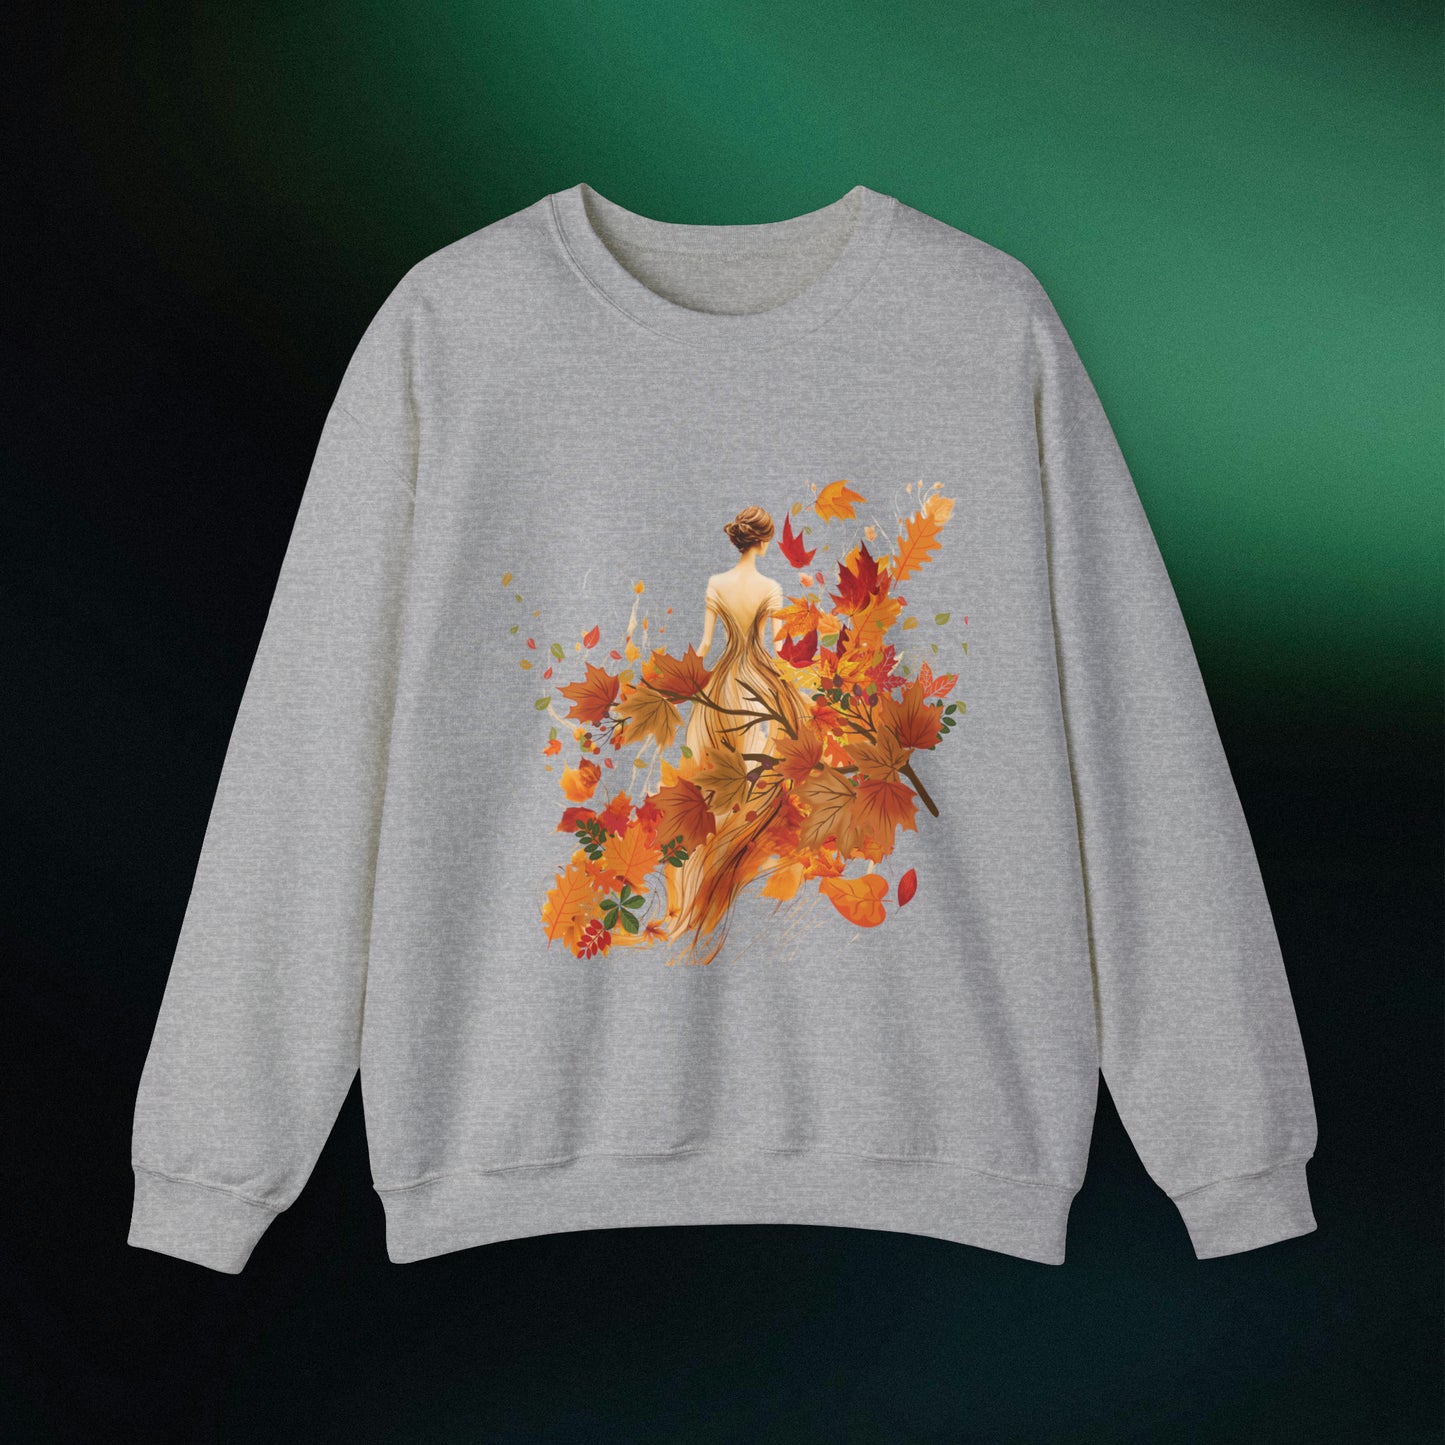 Whimsical Dreams in Autumn Hues: Romantic Dreamy Female Surrounded by Autumn Leaves Sweatshirt Sweatshirt S Sport Grey 